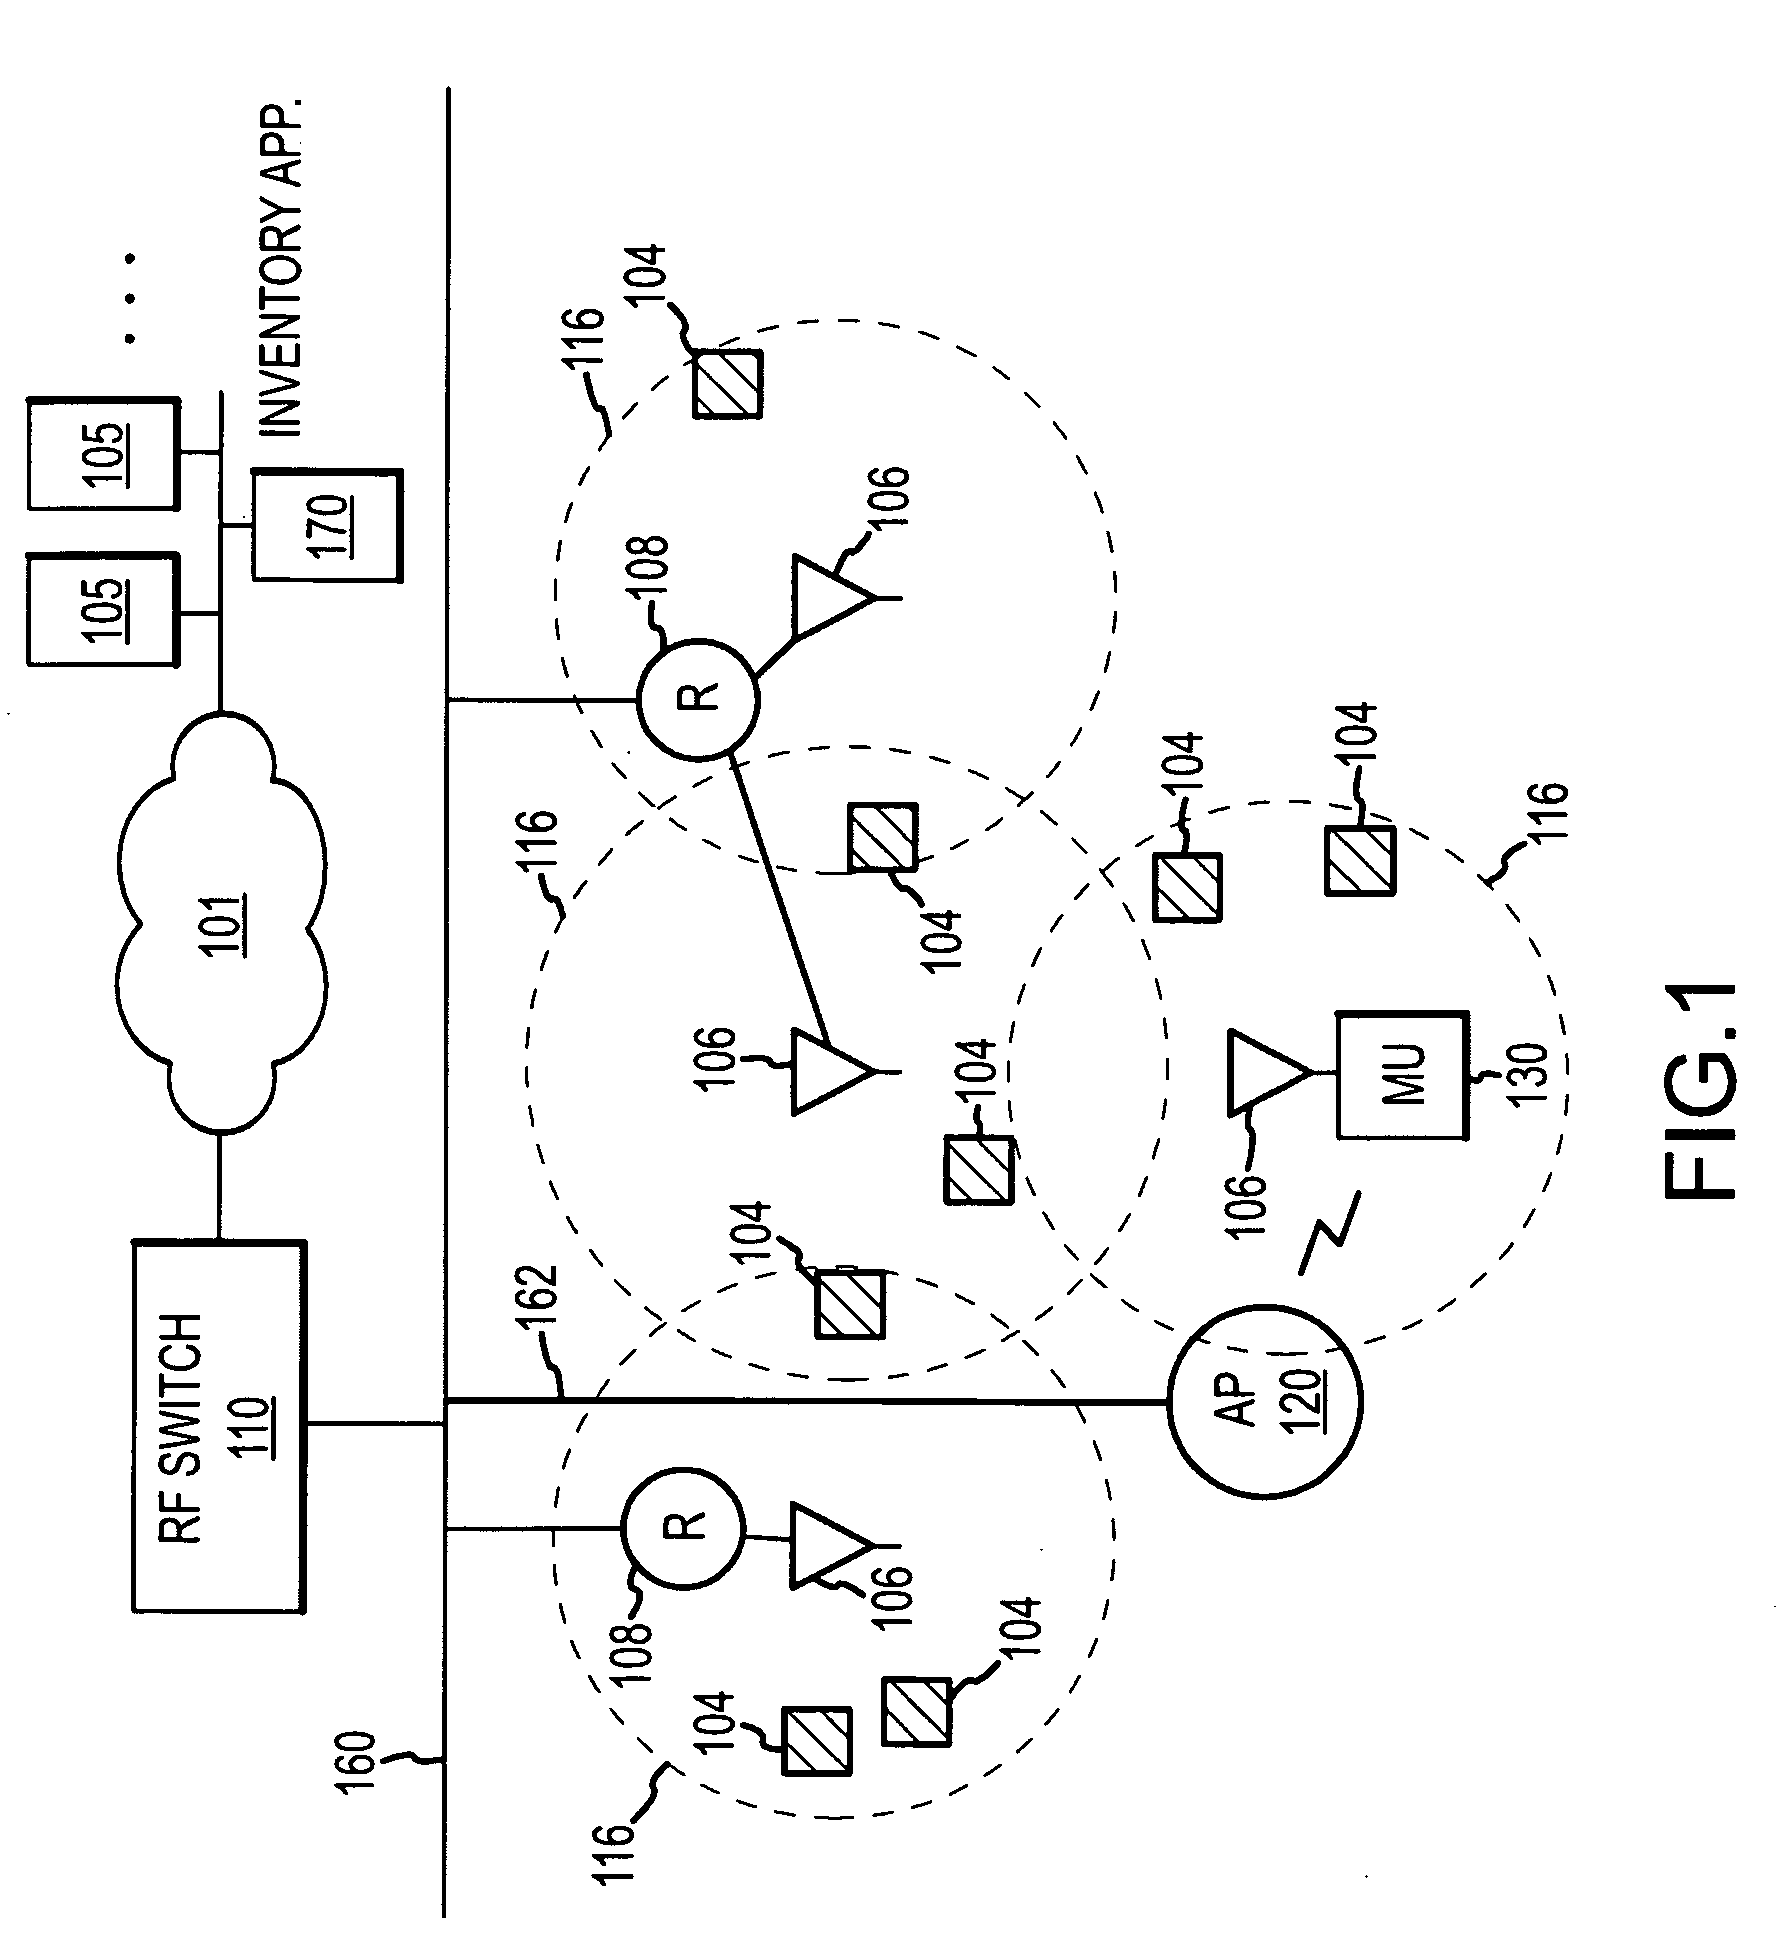 Methods and apparatus for inventory location compliance